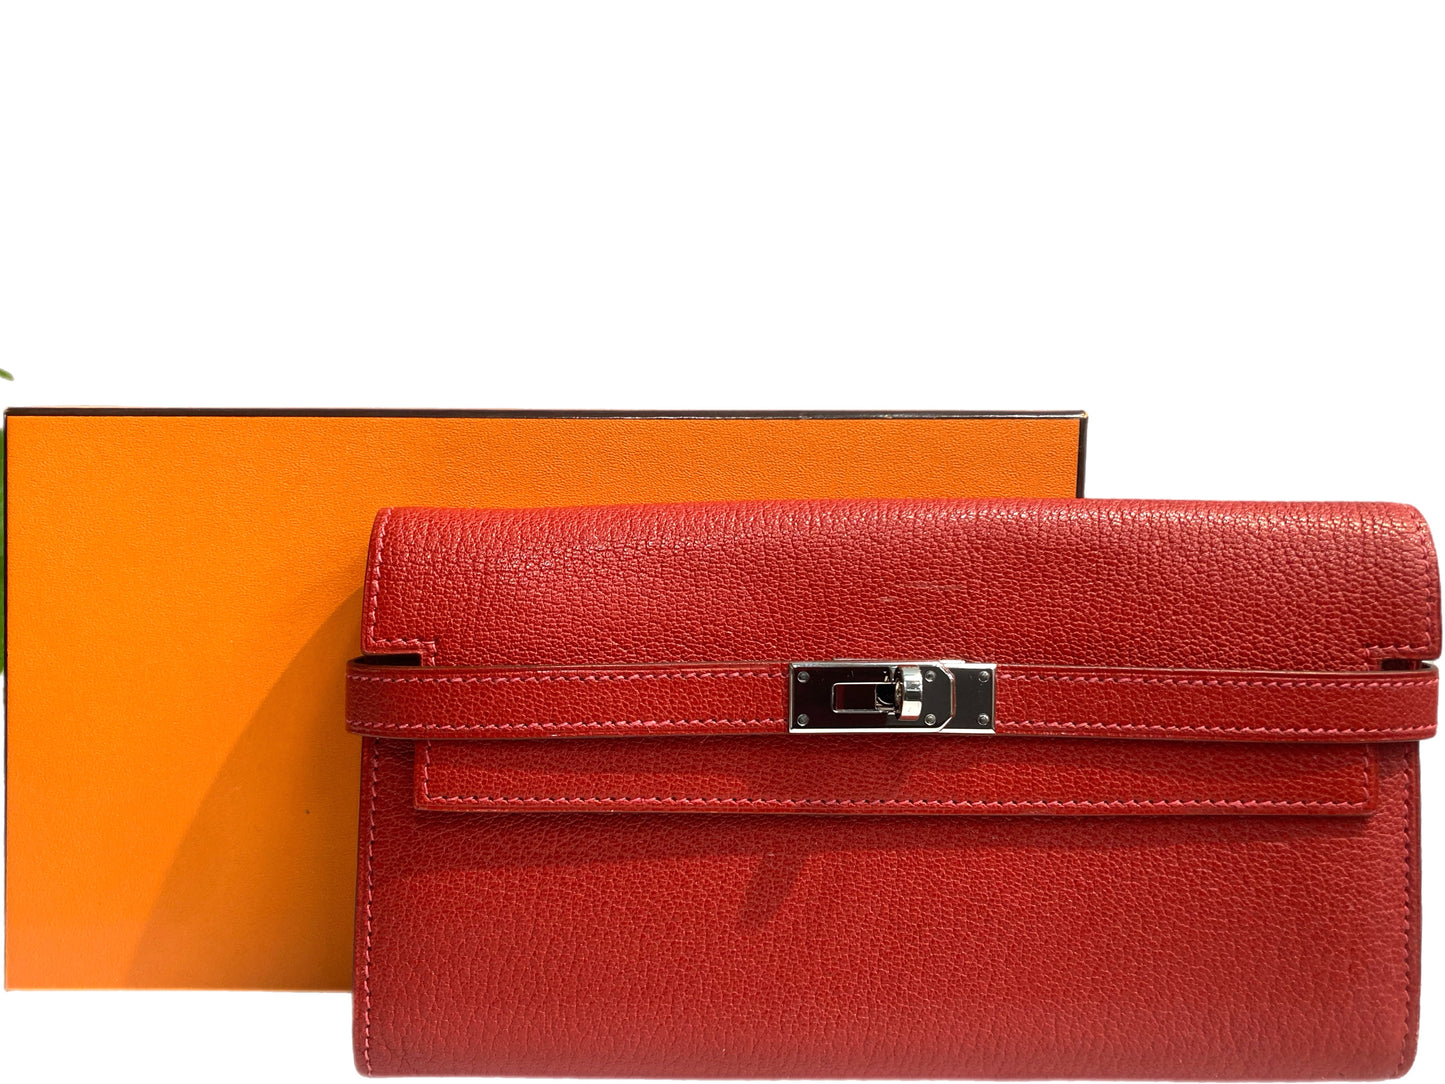 HERMES Leather Kelly Wallet Red